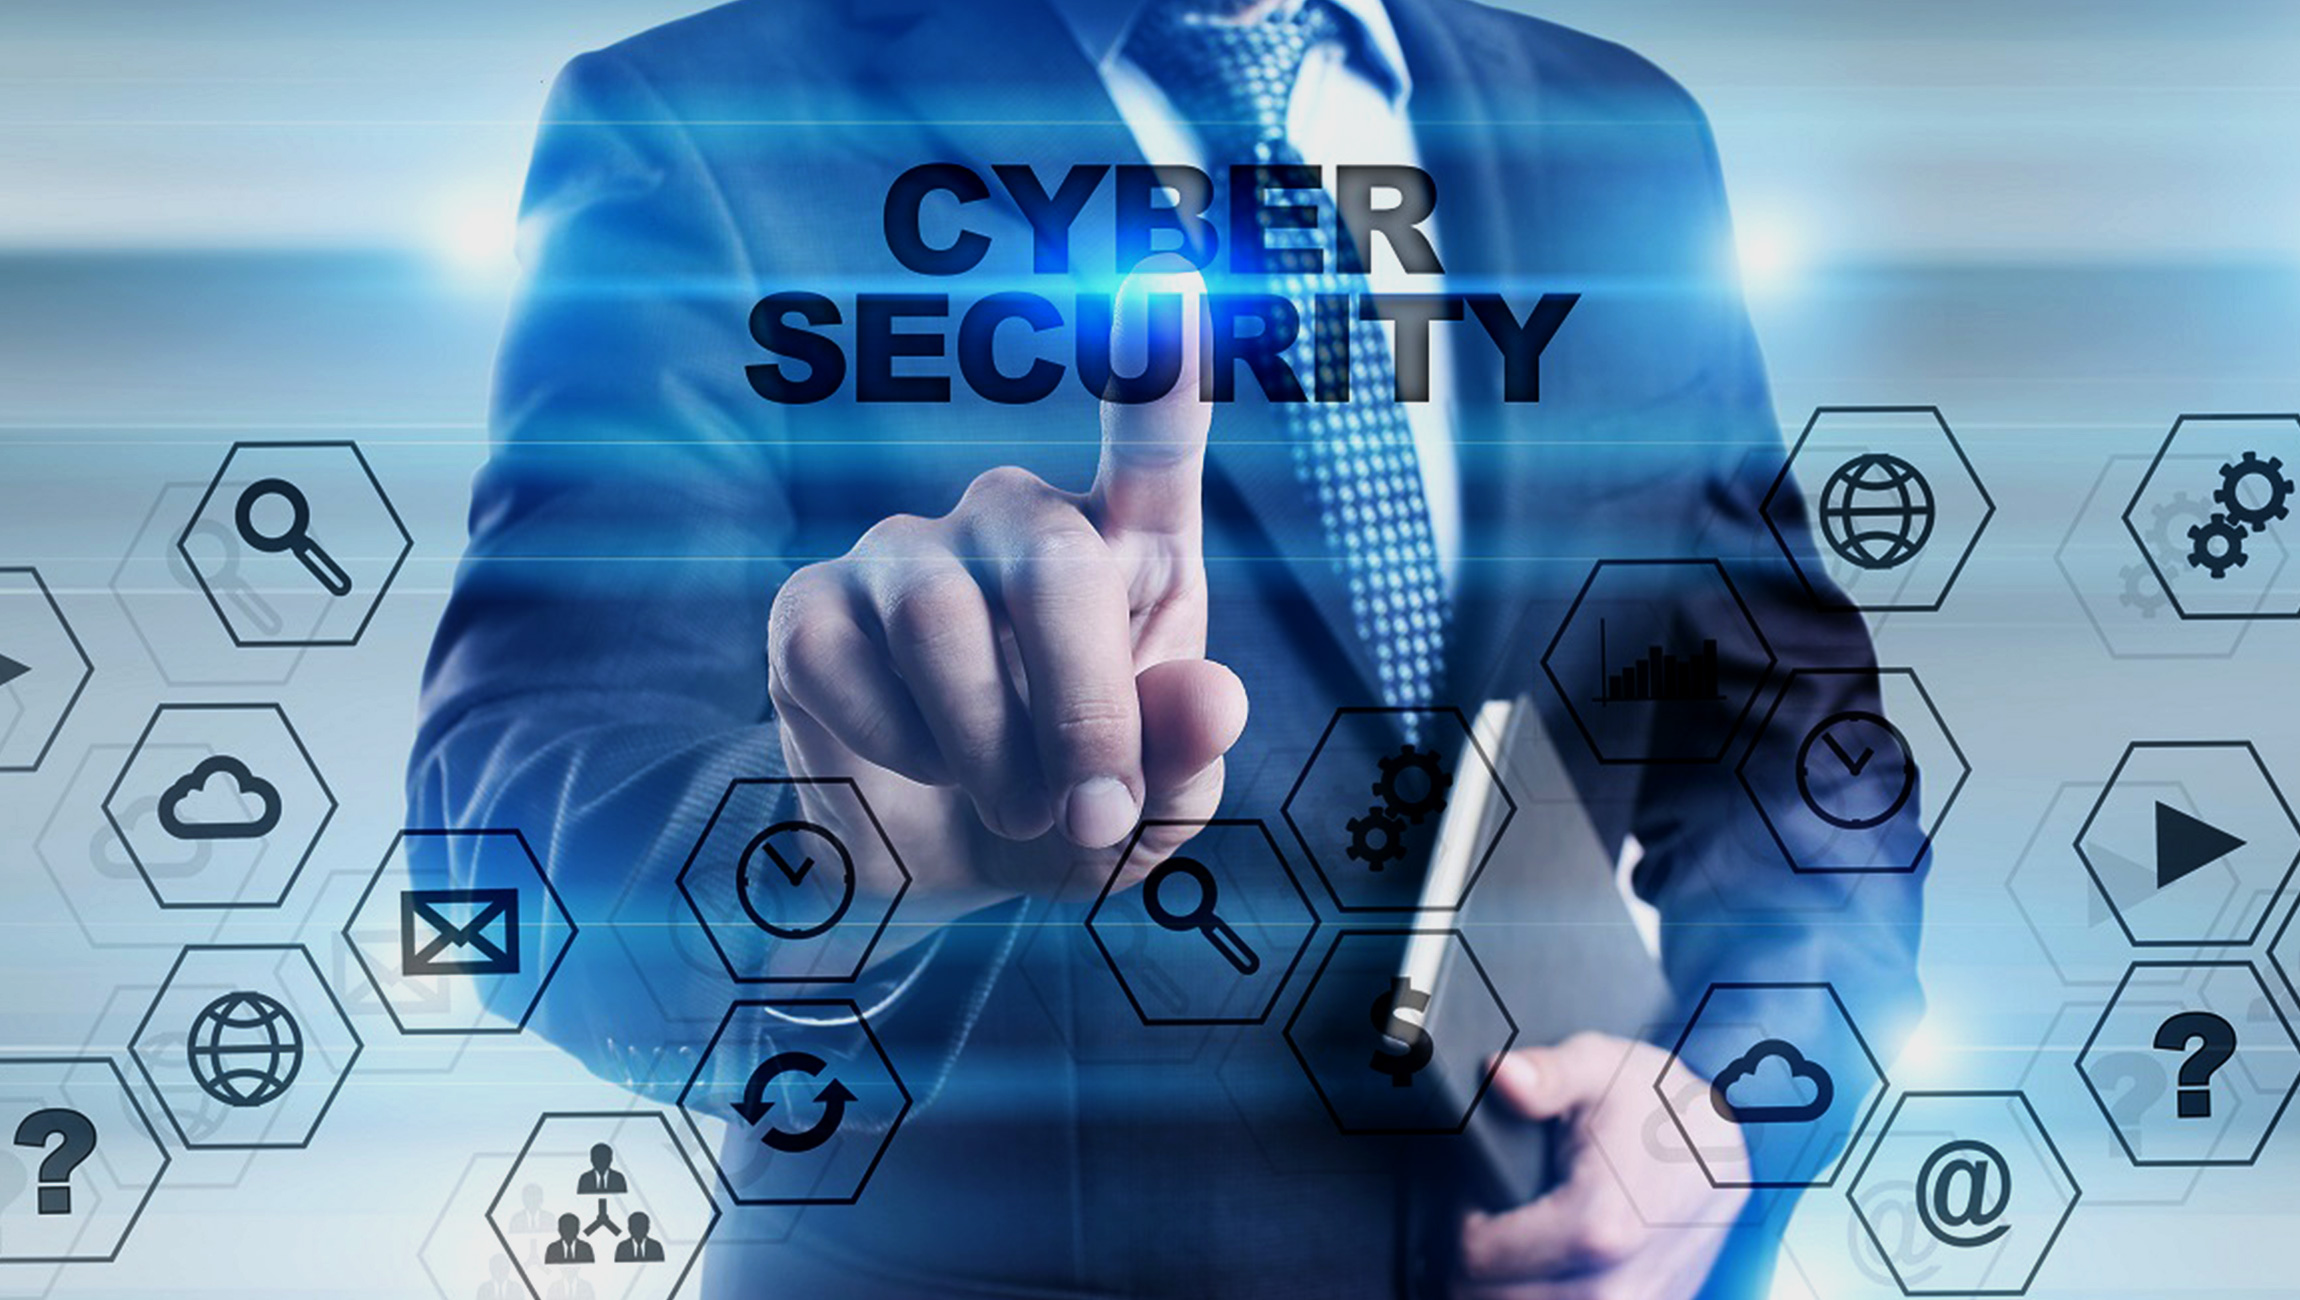 Cybersecurity best practices that every employee should know